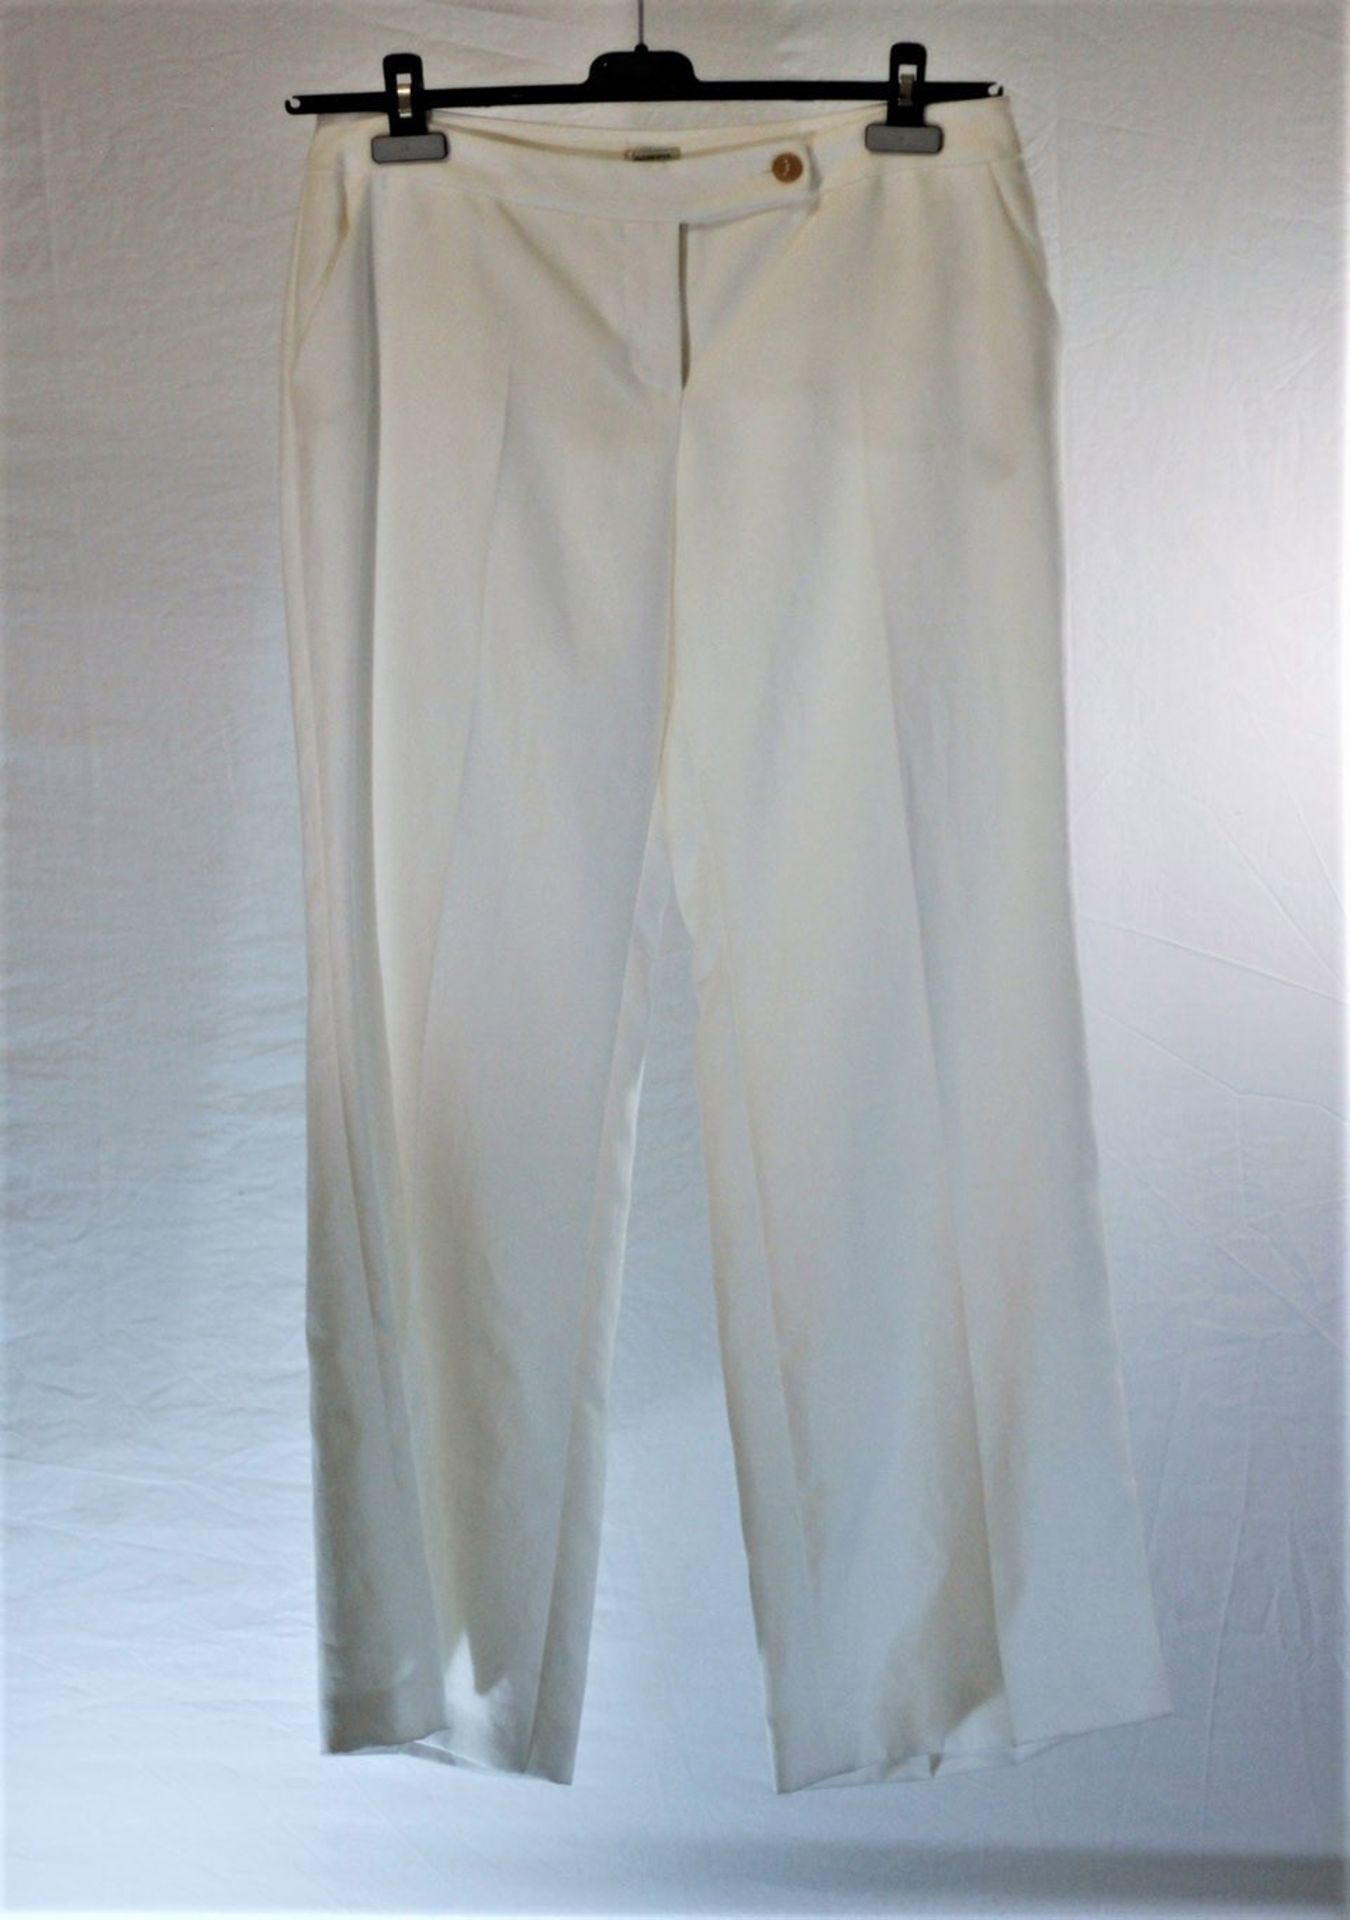 1 x Agnona White Trousers - Size: 16 - Material: 100% Ramie. Lining 52% Viscose, 48% Cotton - From a - Image 2 of 7